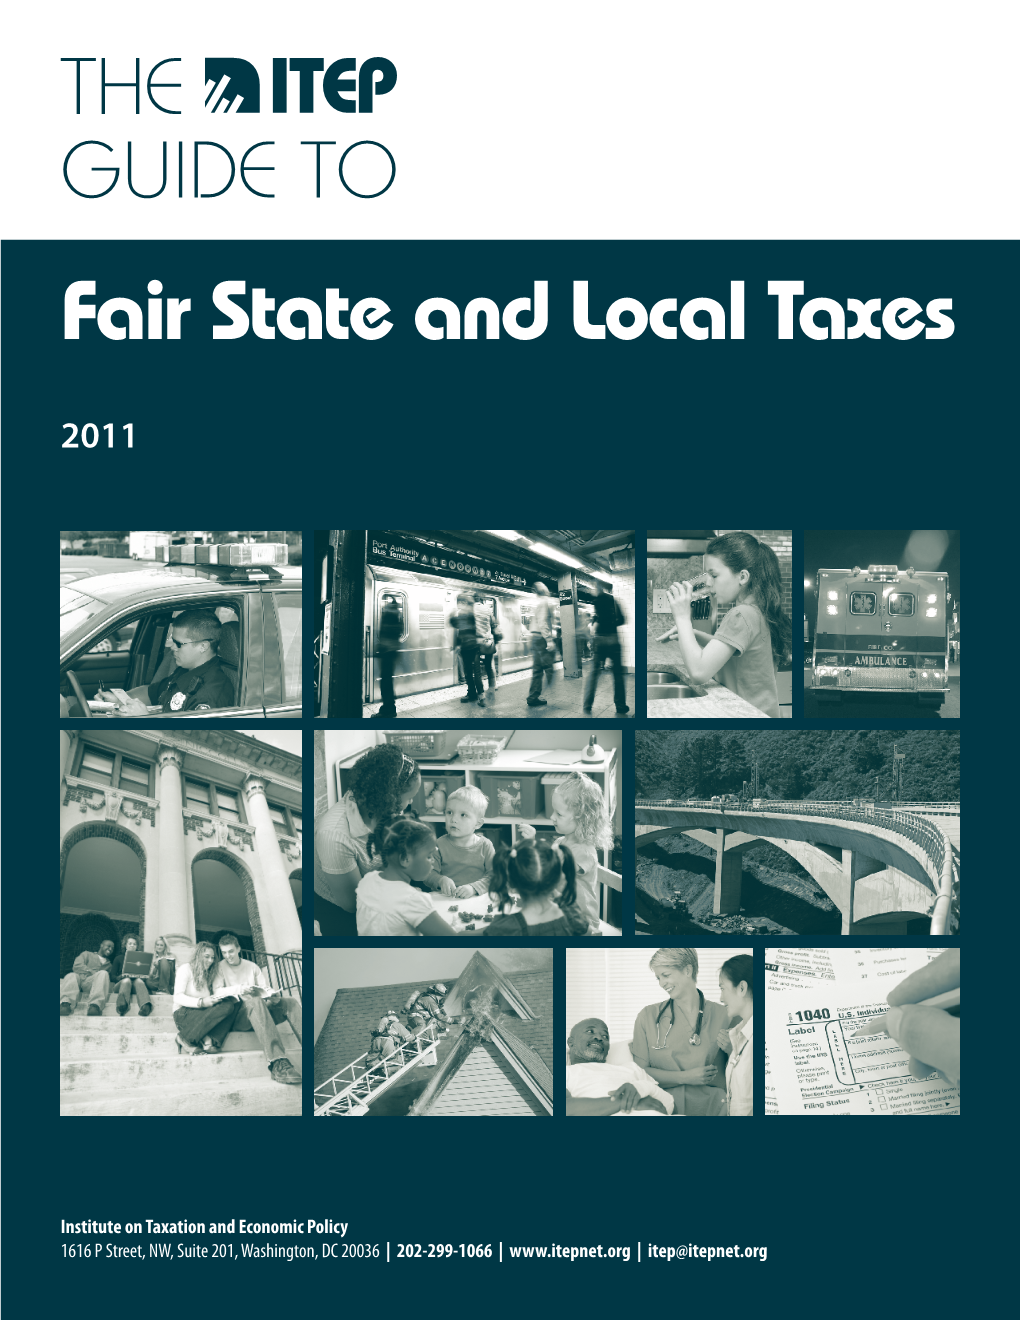 Itep Guide to Fair State and Local Taxes: About Iii